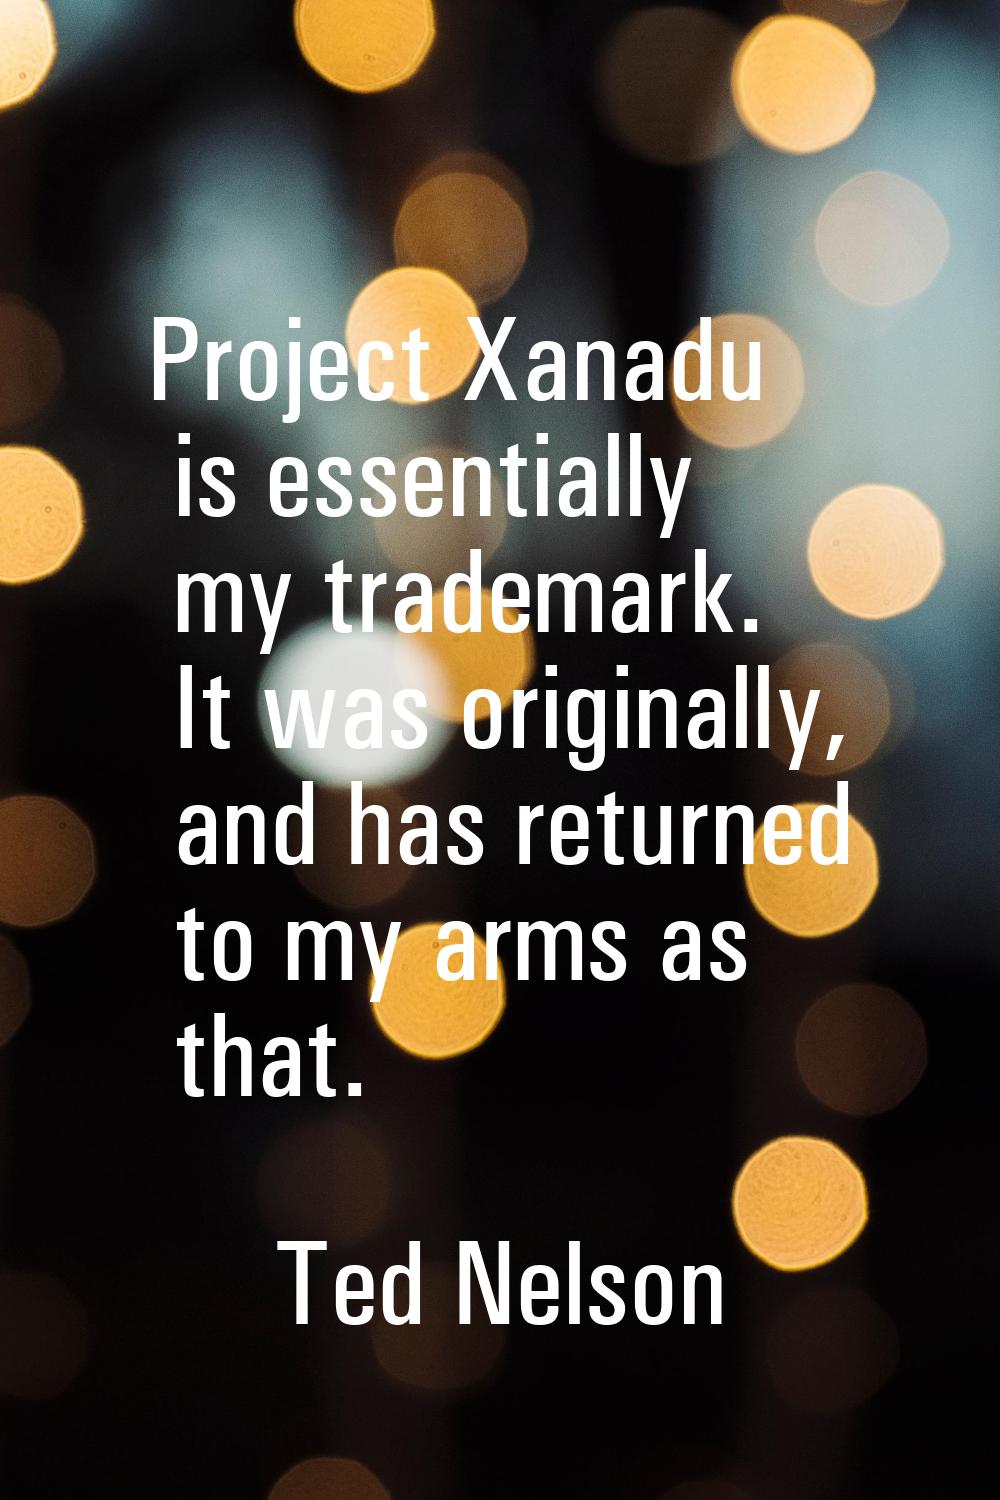 Project Xanadu is essentially my trademark. It was originally, and has returned to my arms as that.